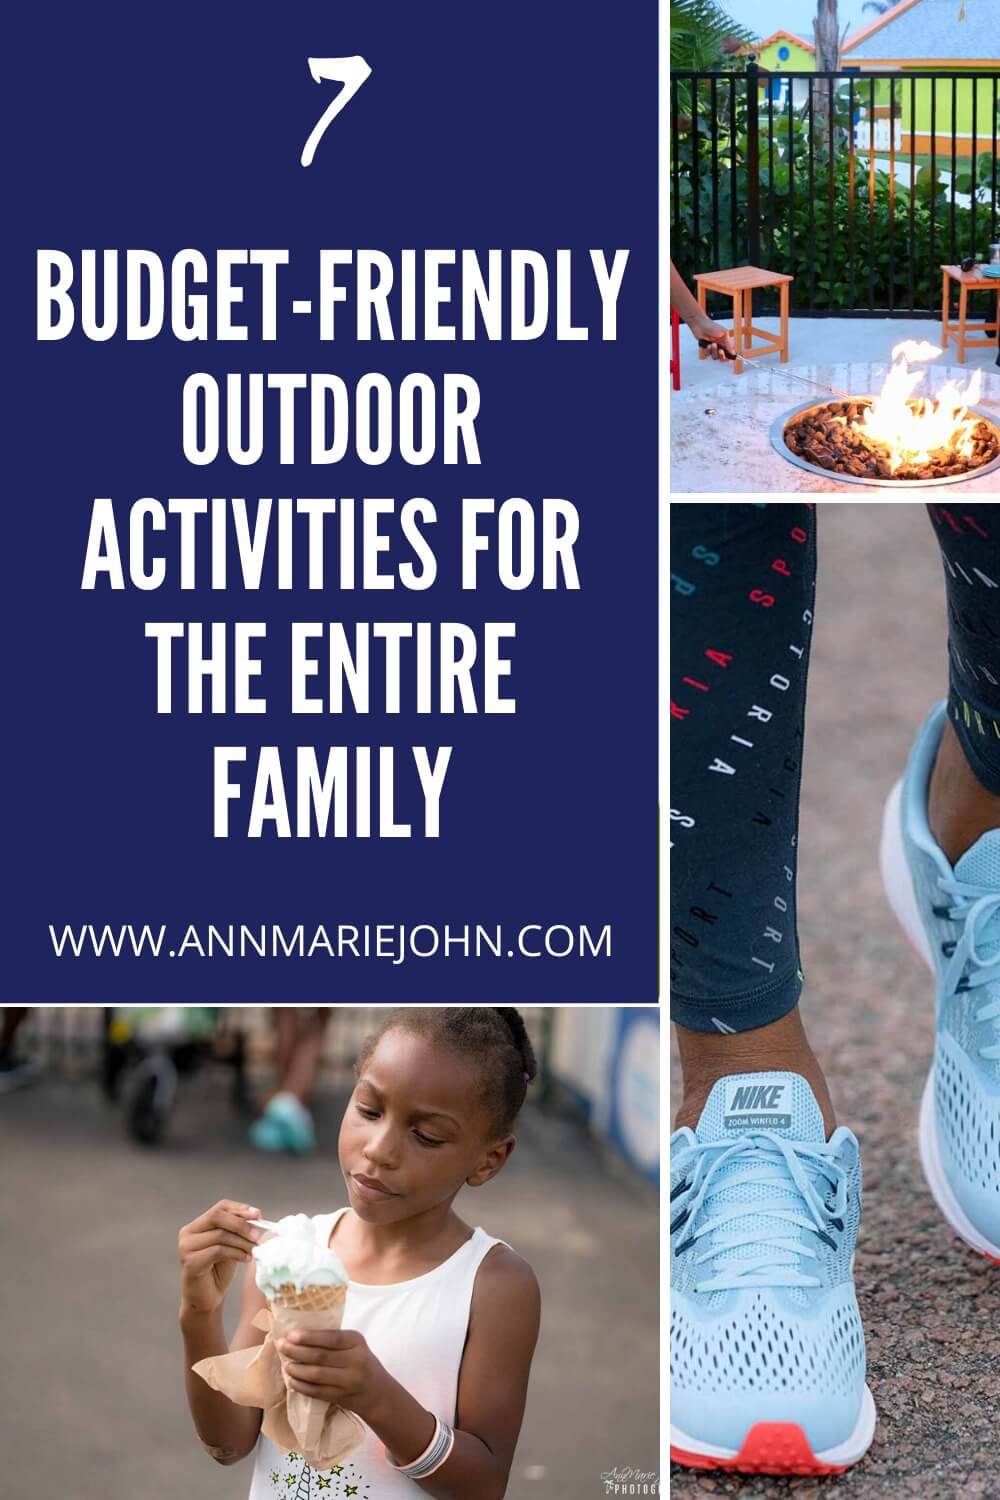 7 Budget-Friendly Outdoor Activities That the Whole Family Can Enjoy